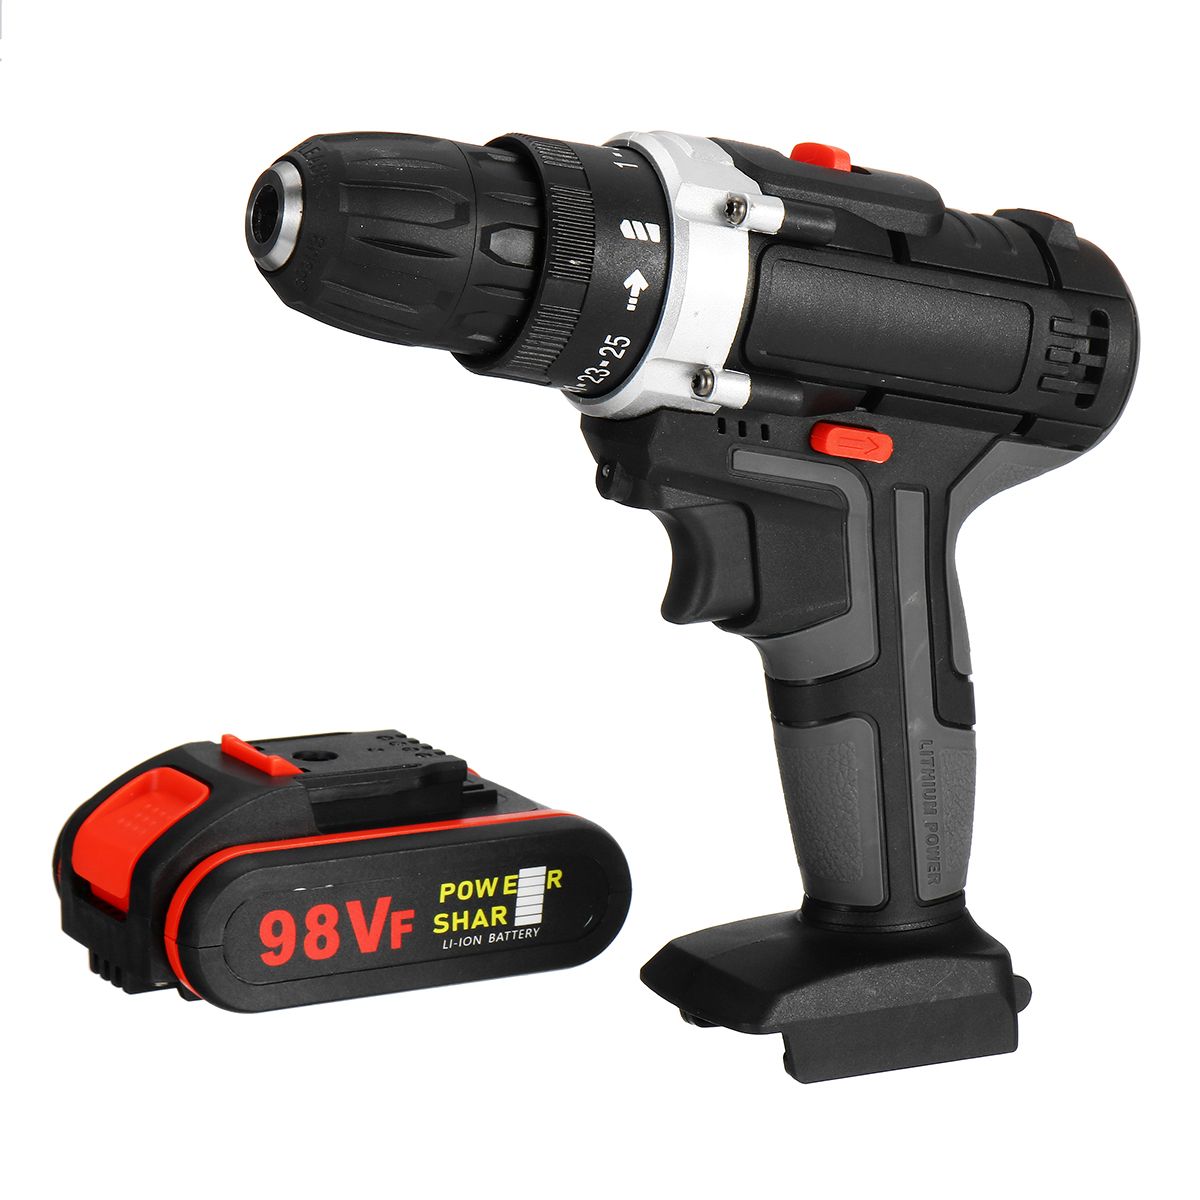 98VF-Electric-Cordless-Impact-Drill-Screwdriver-251-Torque-LED-with-2-Battery-1573796